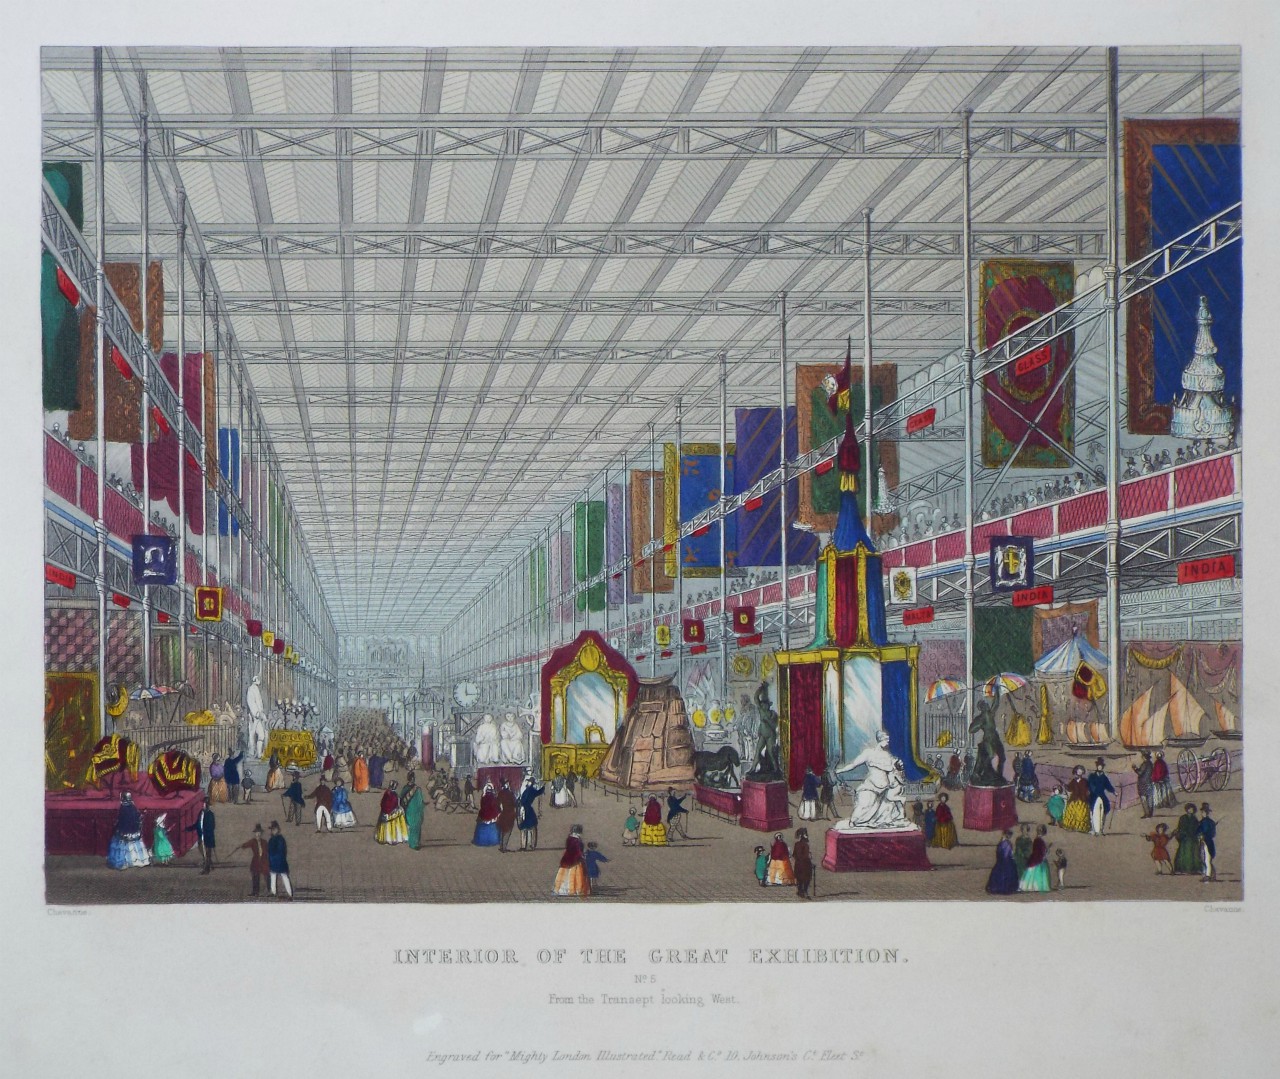 Print - Interior of the Great Exhibition. No.5. From Transept looking West. - 